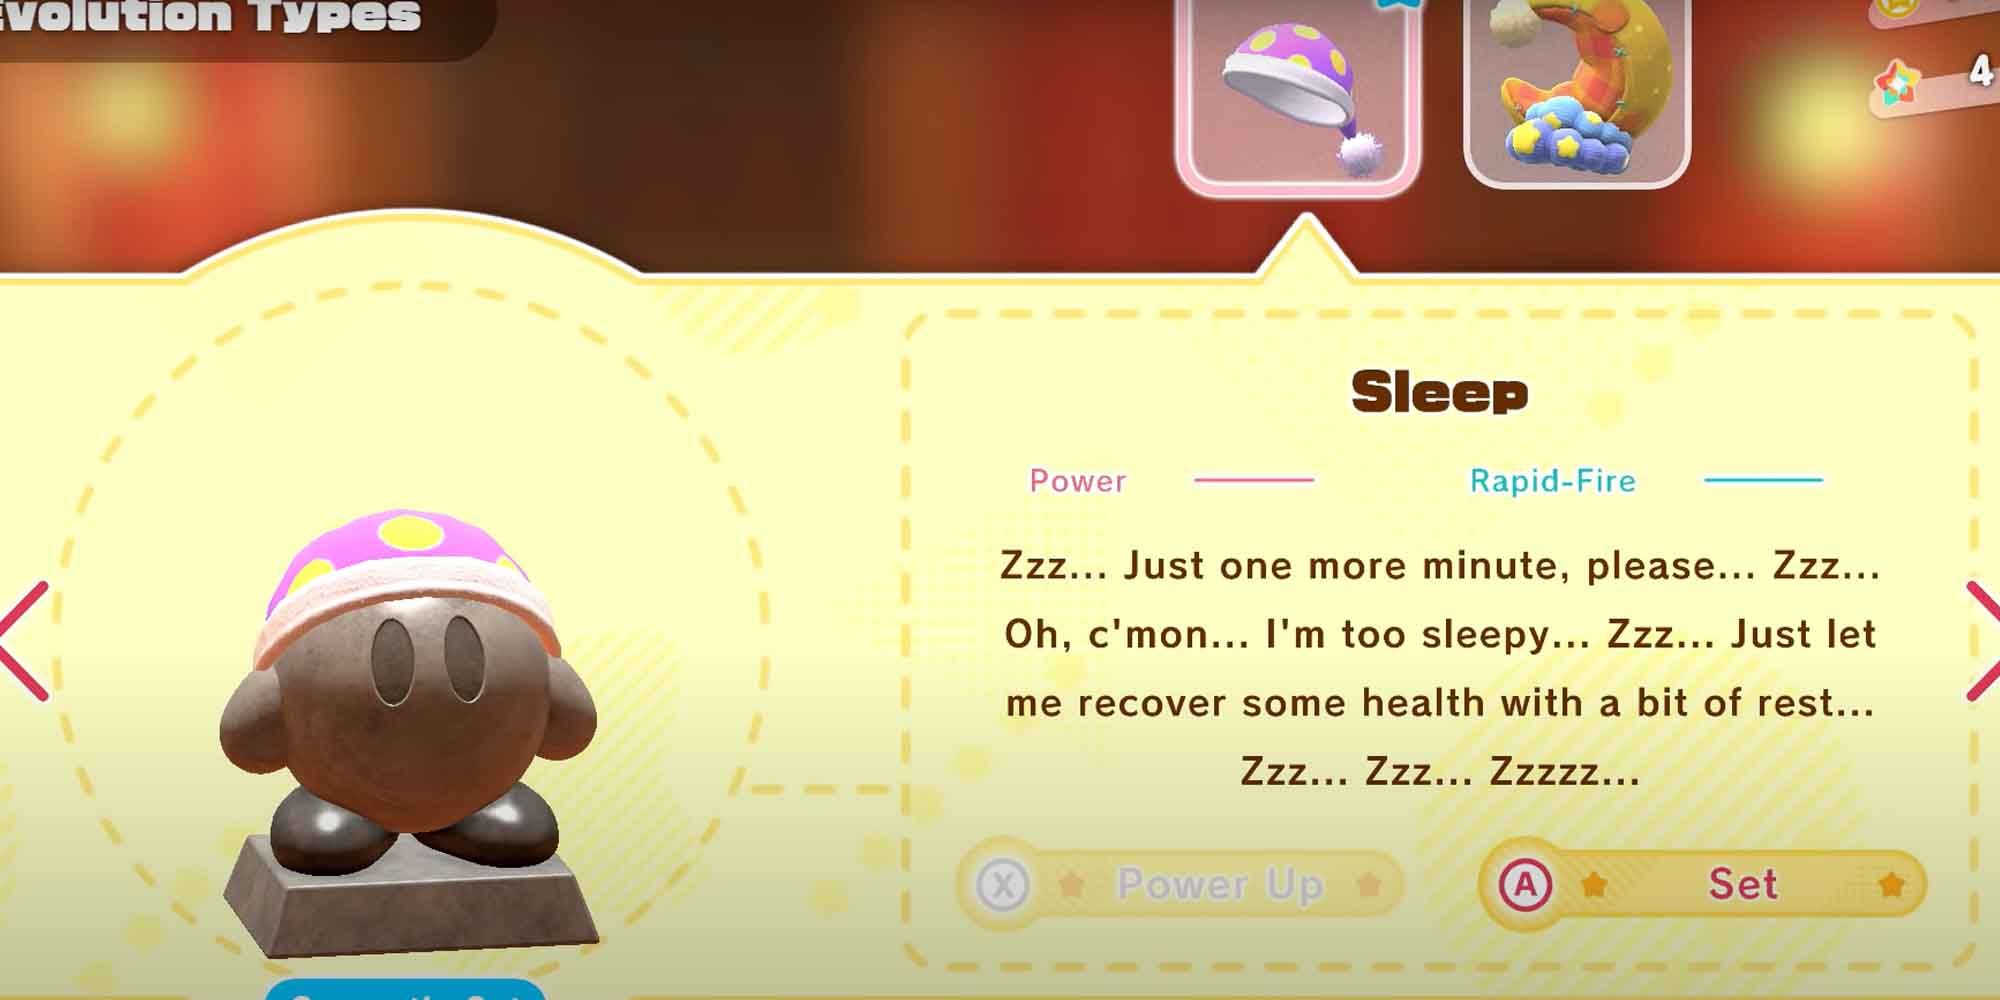 The Sleep copy ability in Kirby in The Forgotten Land